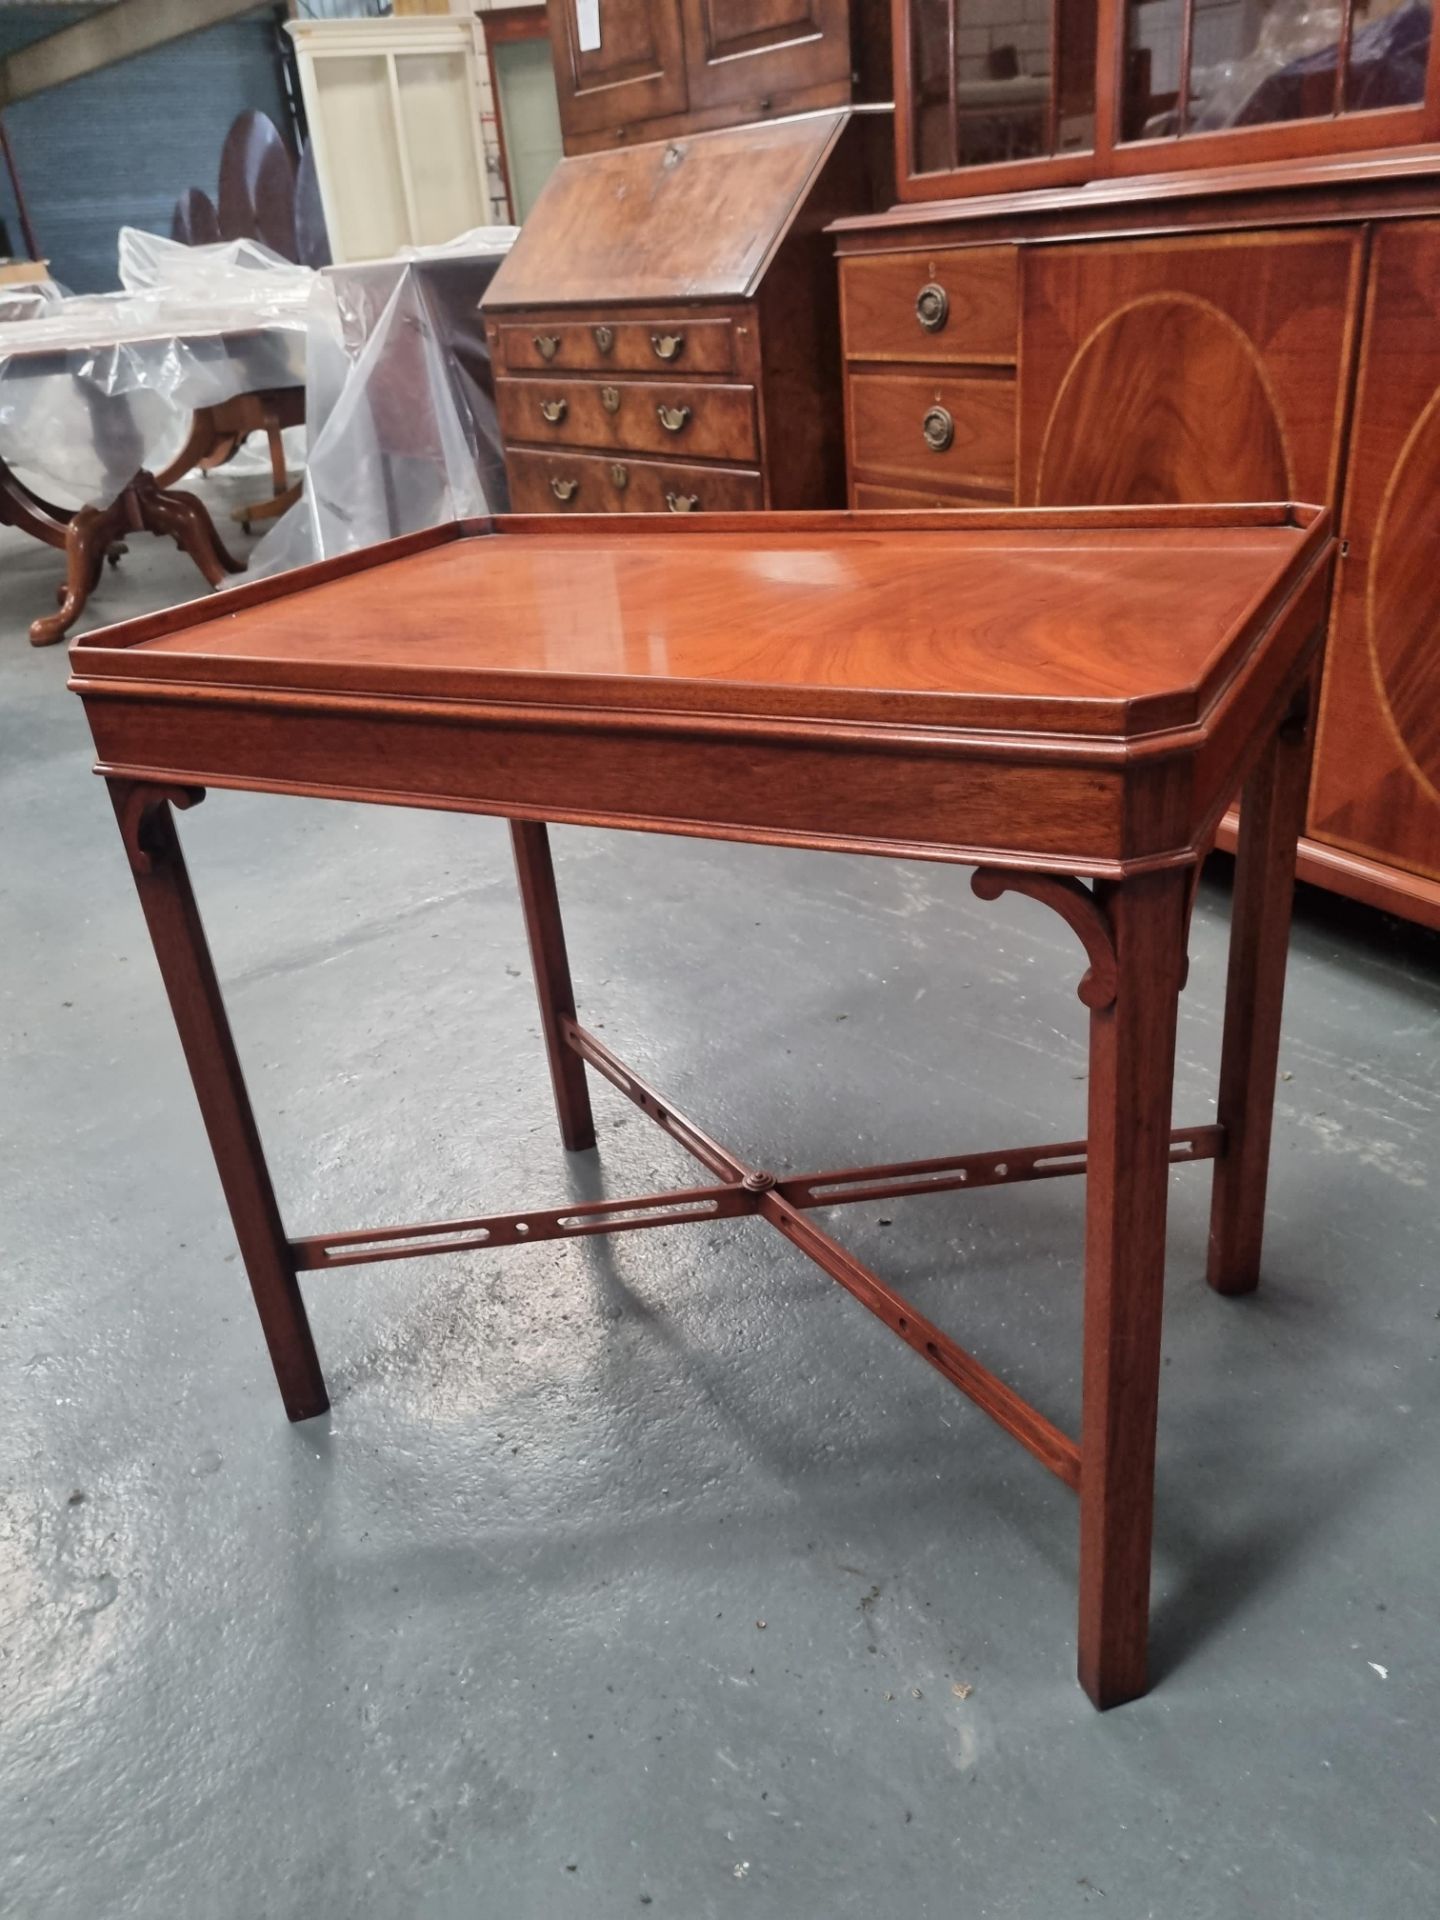 Arthur Brett Mahogany End Table In X Antique Finish Chippendale-Style With Low Gallery And Pierced